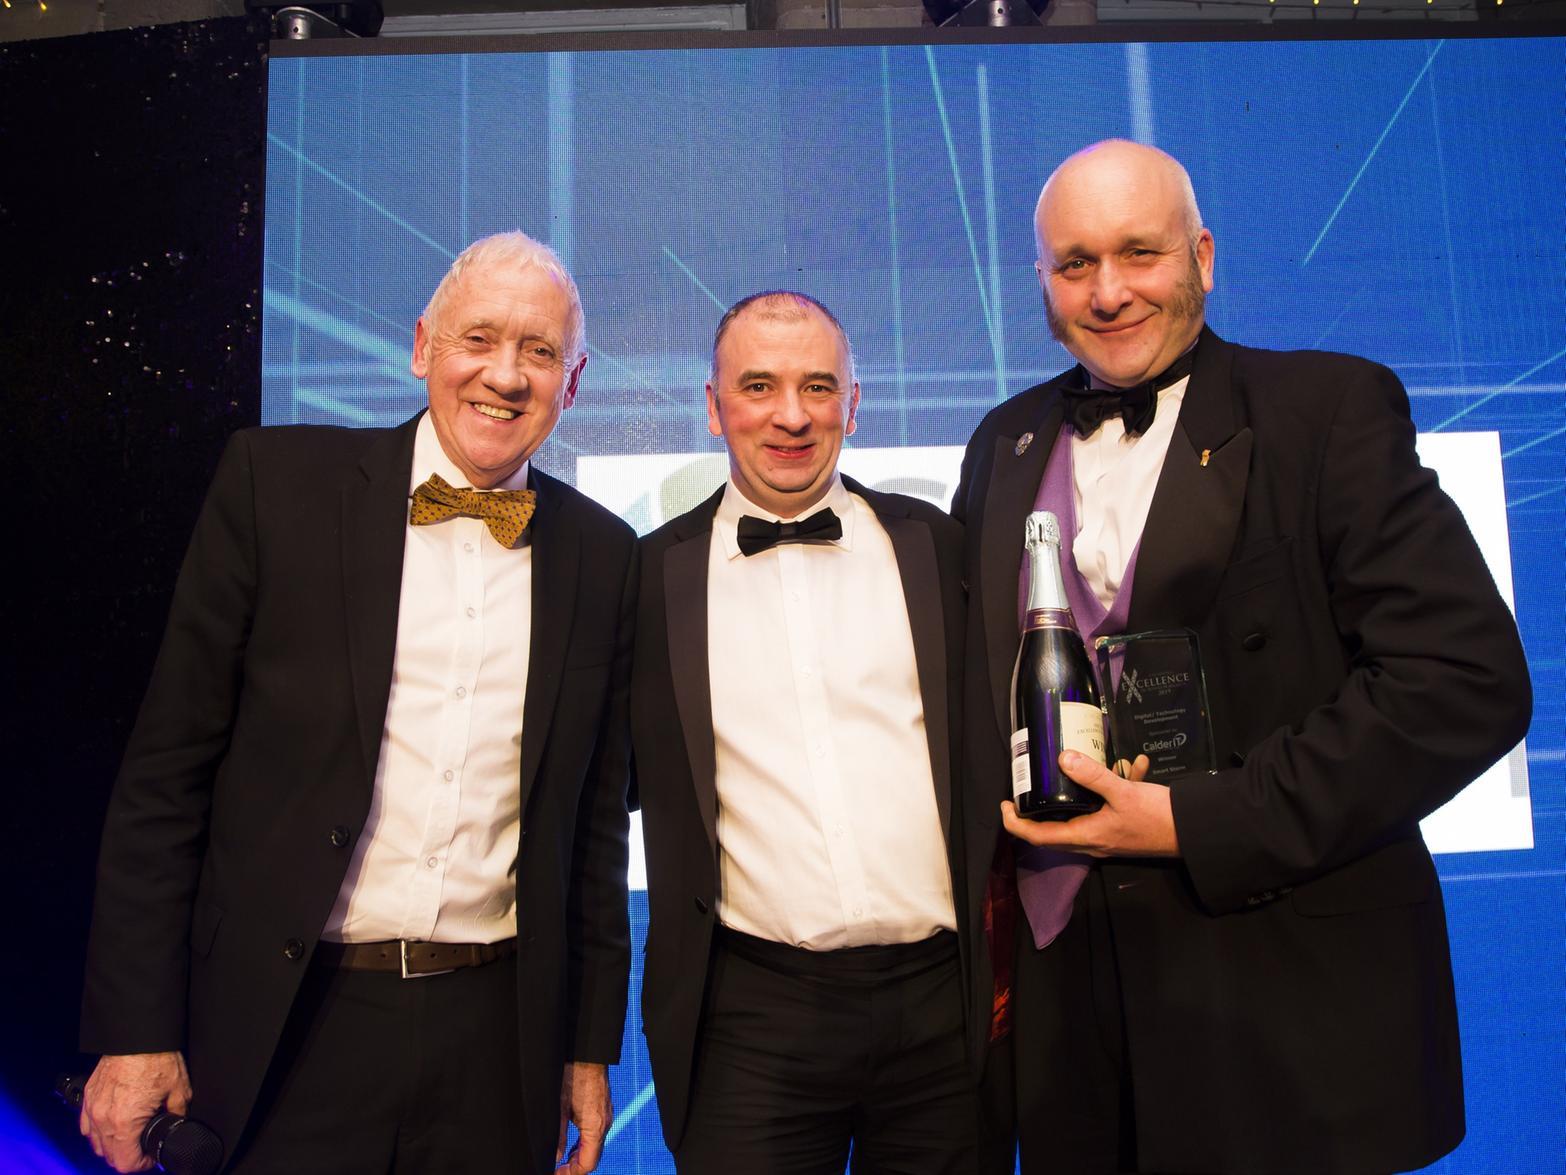 Host Harry Gration, left, with sponsor James Bulley from Calder IT and Laurence Dowson from Smart Storm, winner of the Digital Technology Development Award.